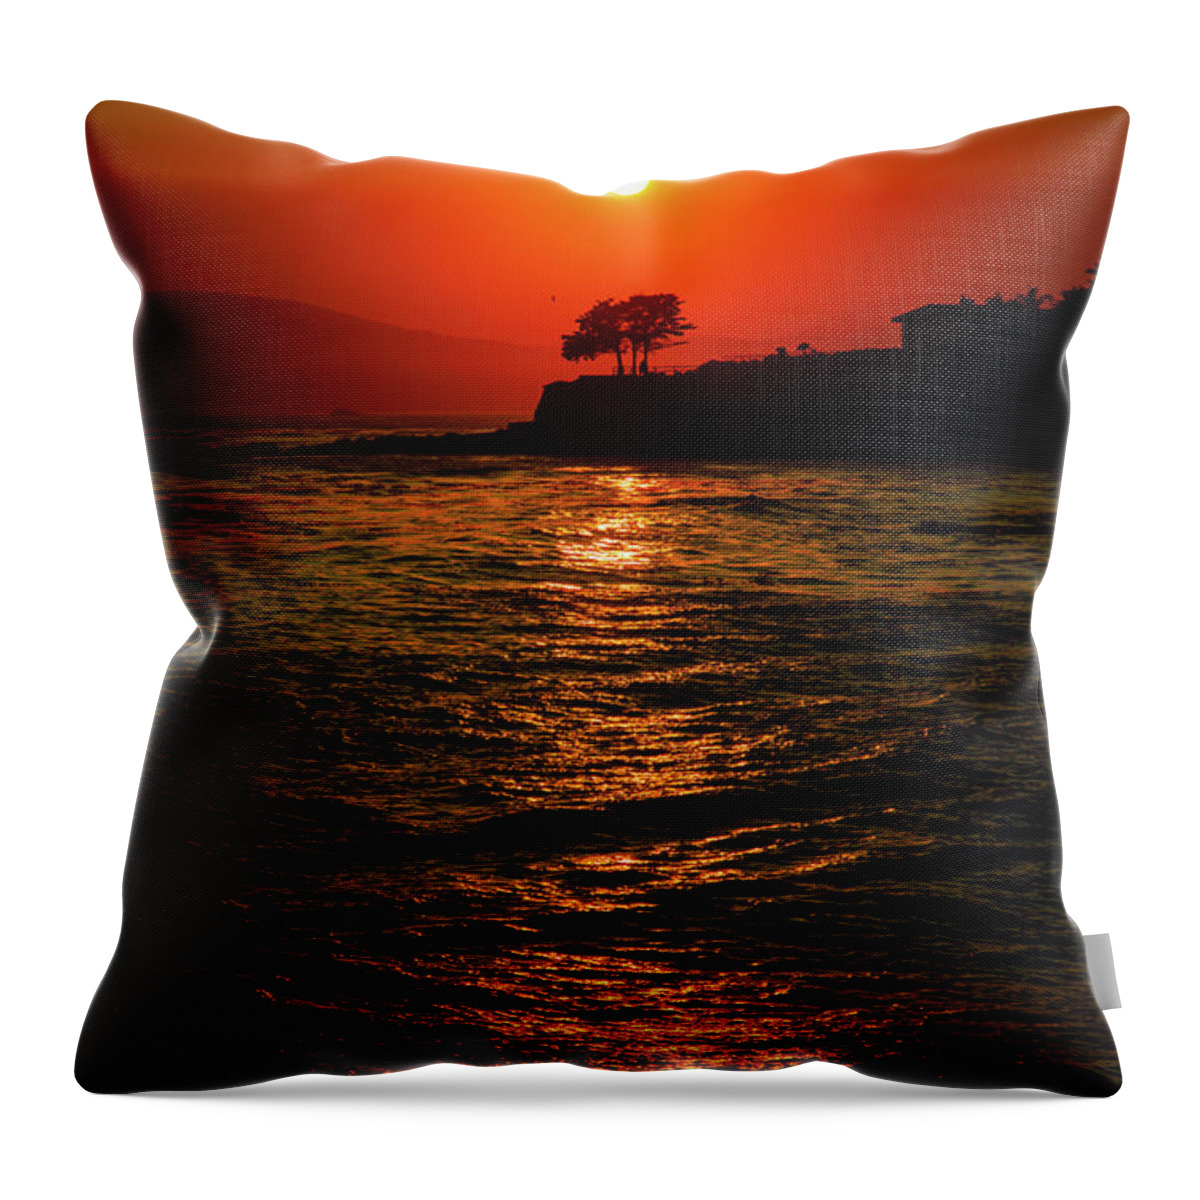 Sunset Throw Pillow featuring the photograph Red Sunset Pismo Beach by Vivian Krug Cotton